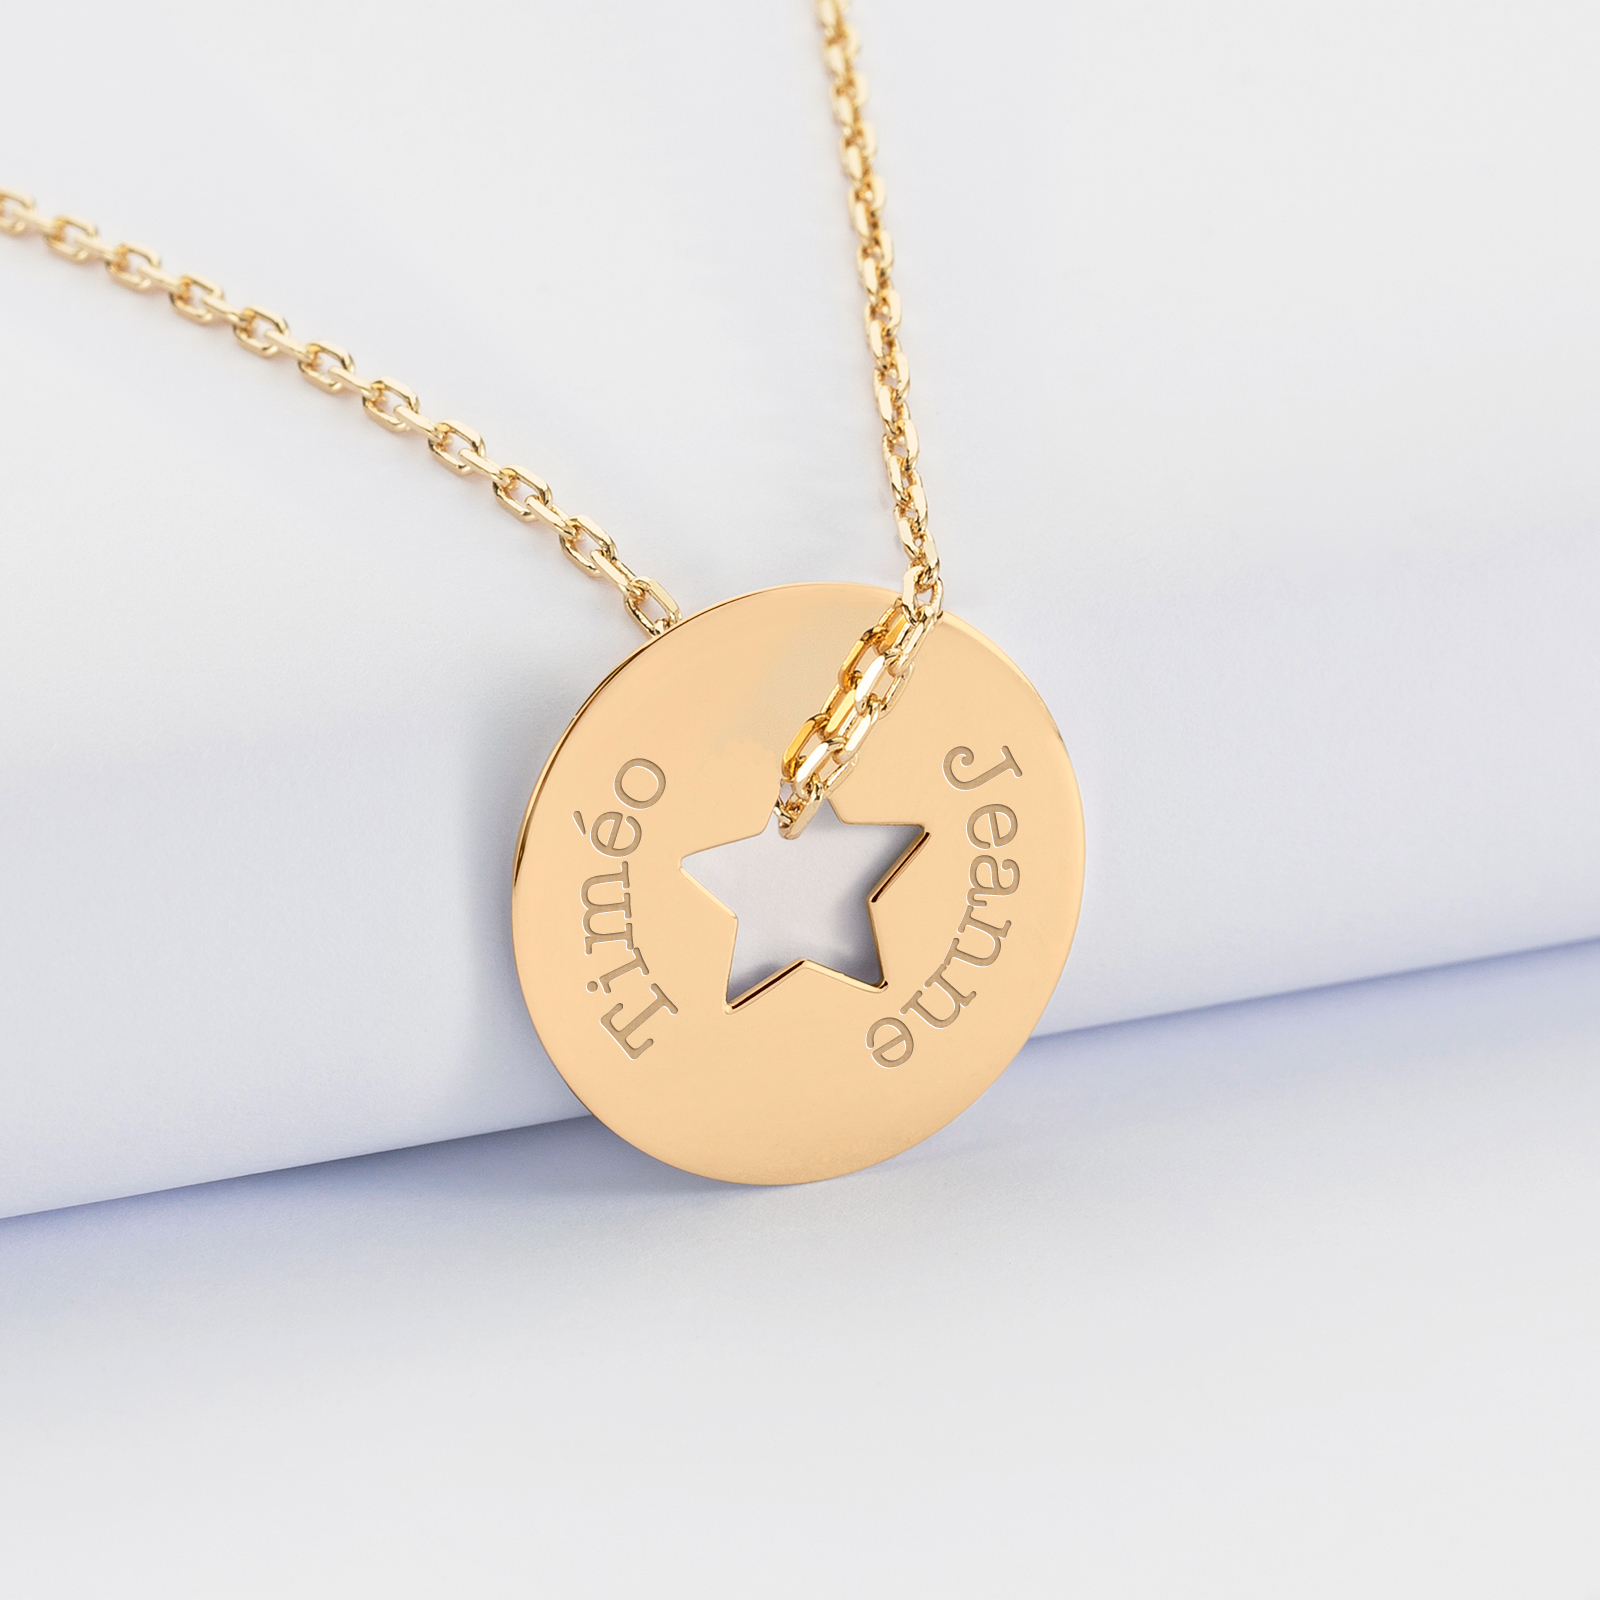 Personalised engraved gold plated target heart medallion pendant 21 mm - names